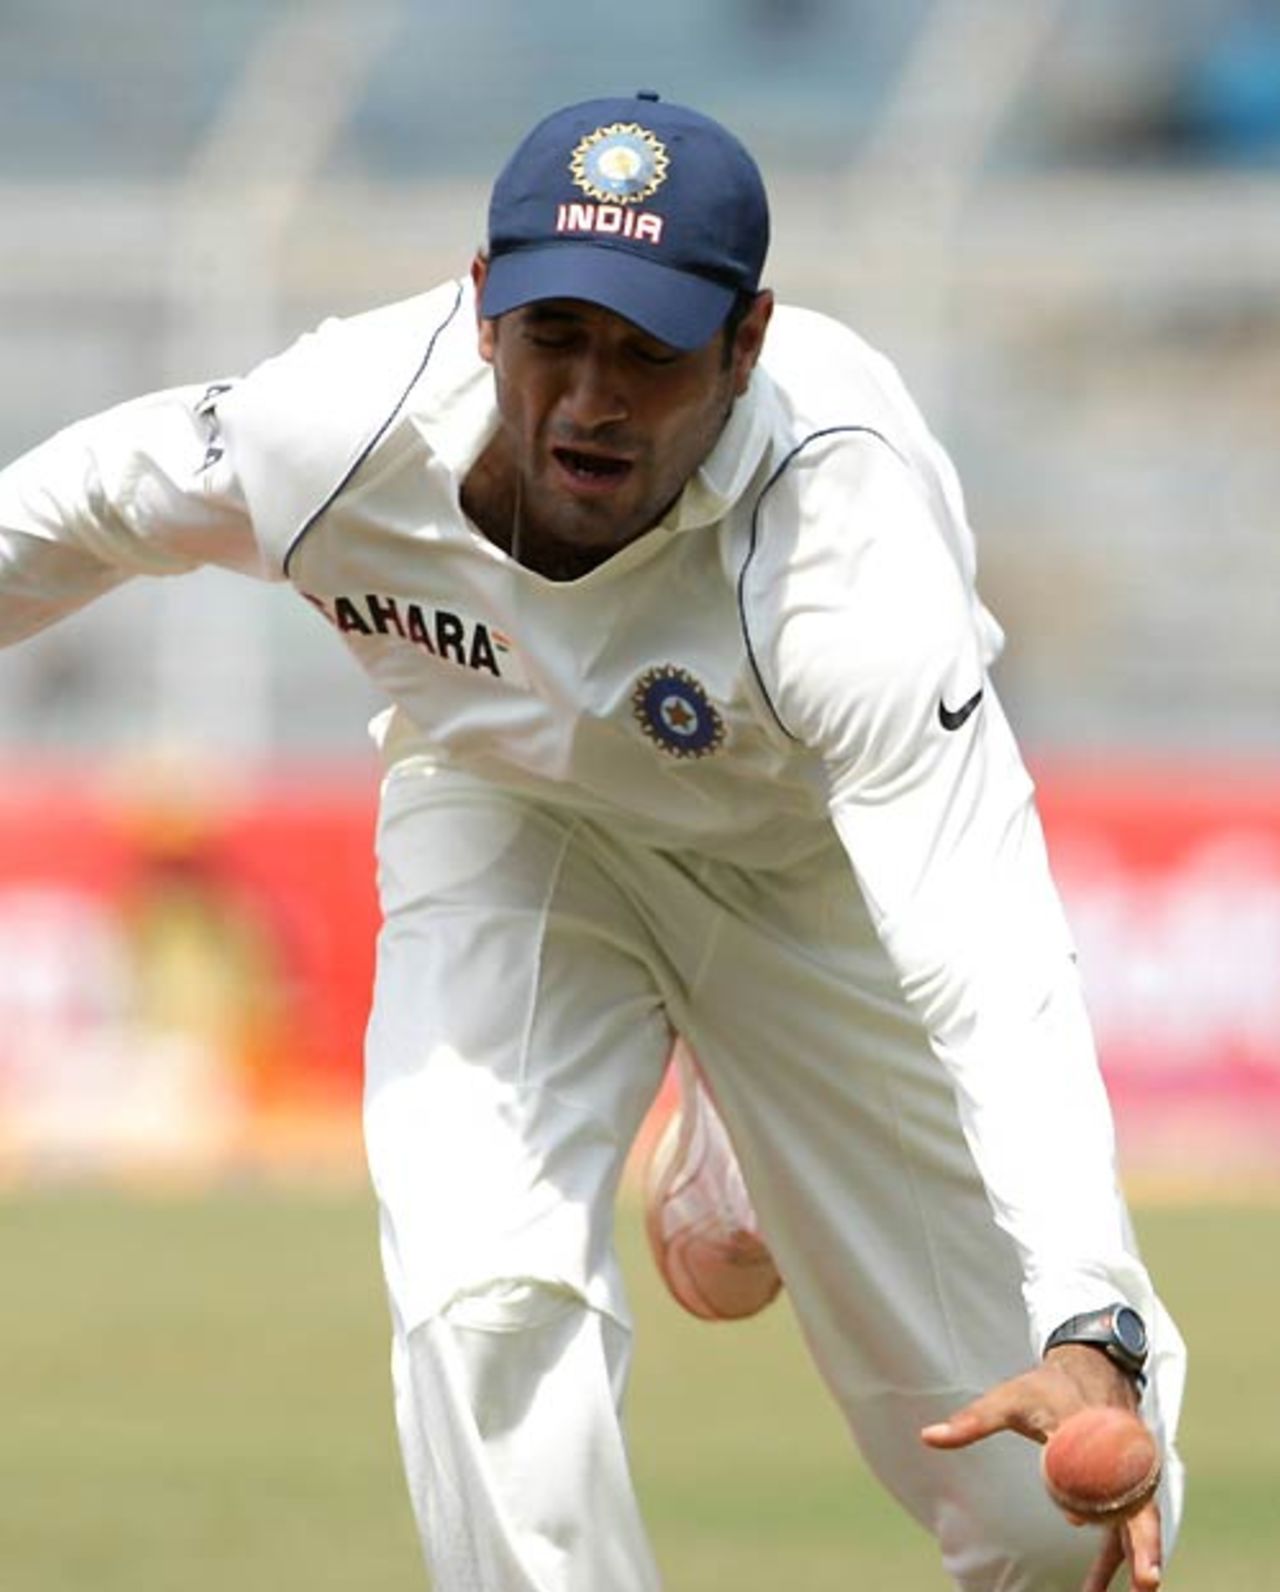 Irfan Pathan reaches out in vain to take a catch, India v South Africa, 1st Test, Chennai, 5th day, March 30, 2008 